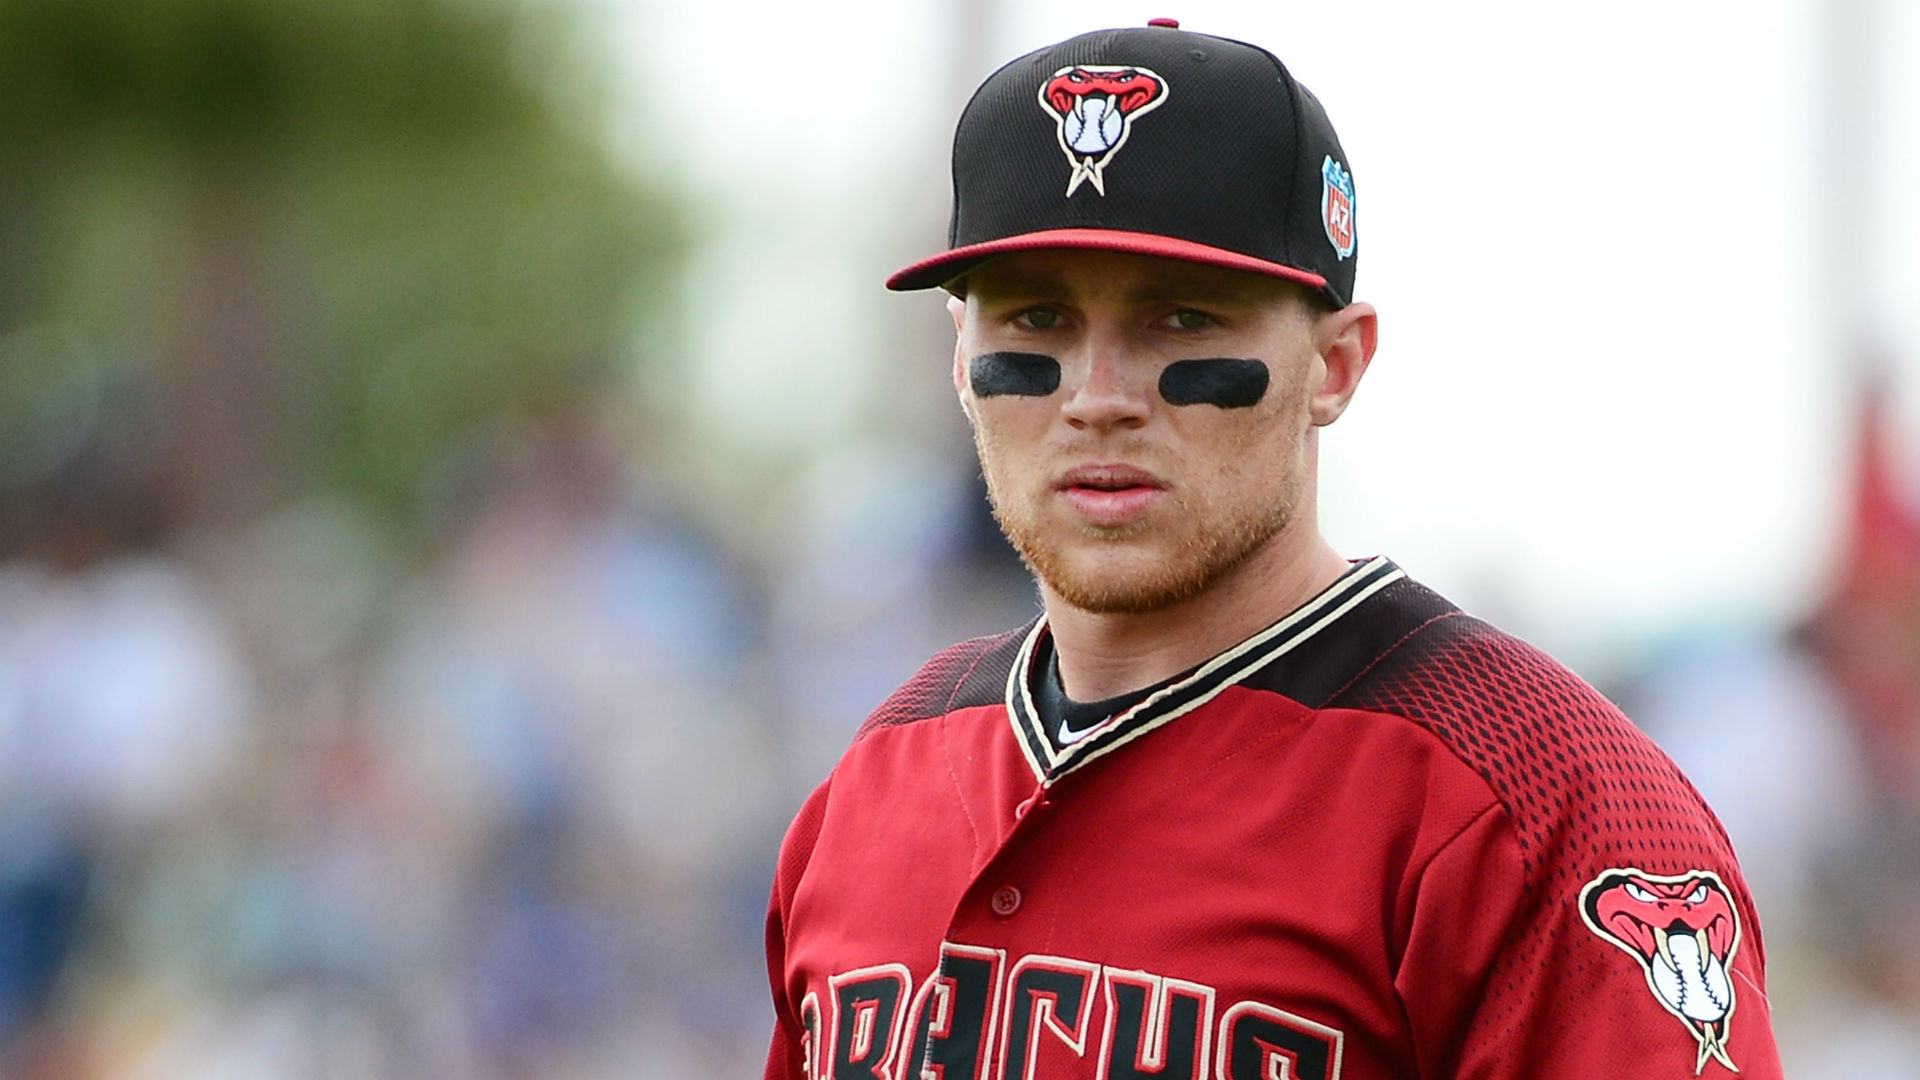 Spring Training Scouting Report Dbacks loaded with young talent